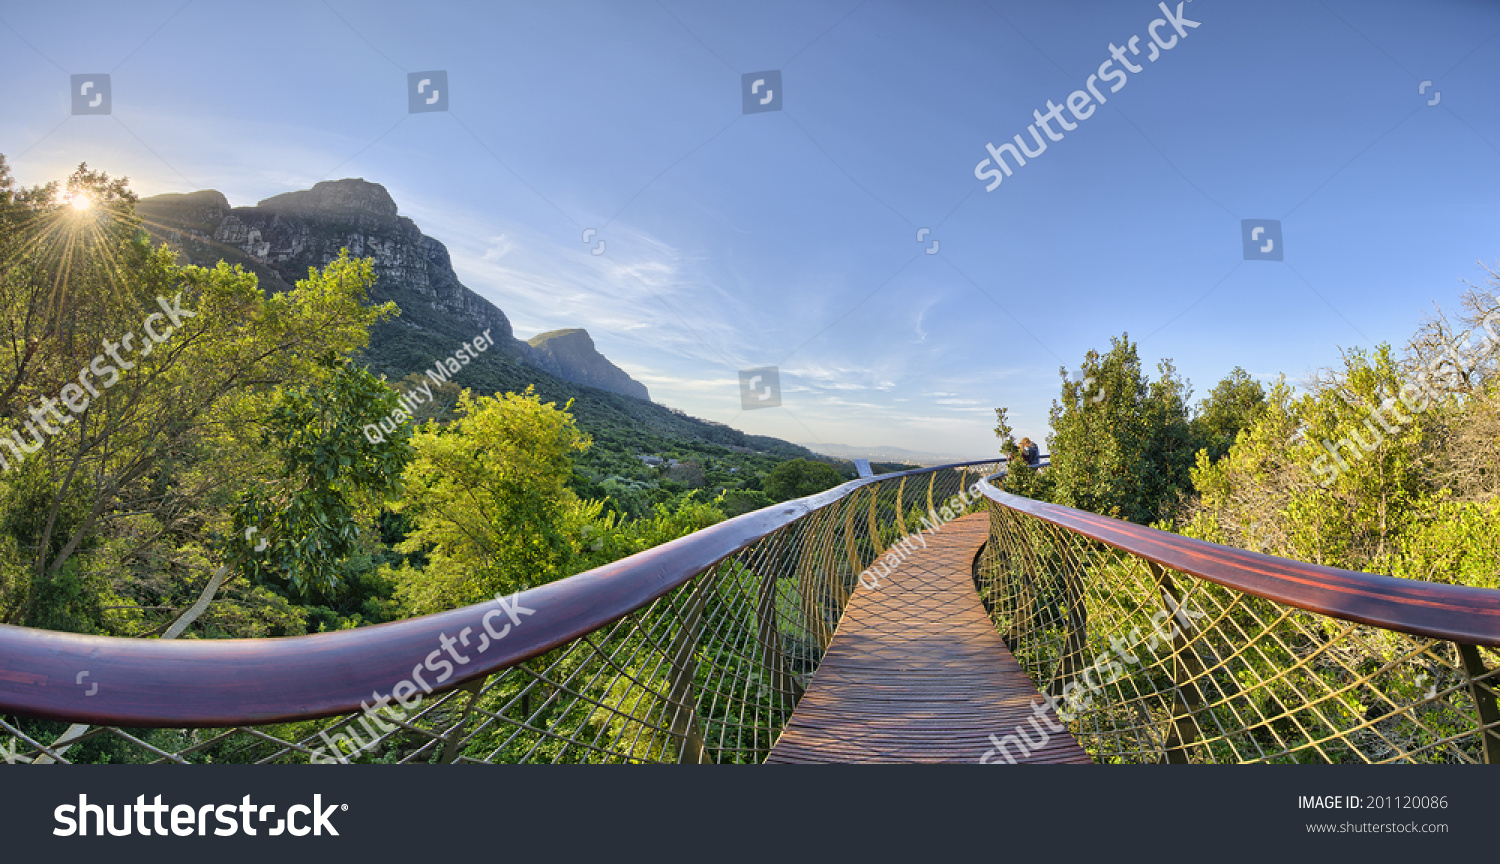 Kirstenbosch National Botanical Garden is acclaimed as one of the great botanic gardens of the world. Located in Cape Town, South Africa, the new tree top canopy walk is a tourist favorite. #201120086